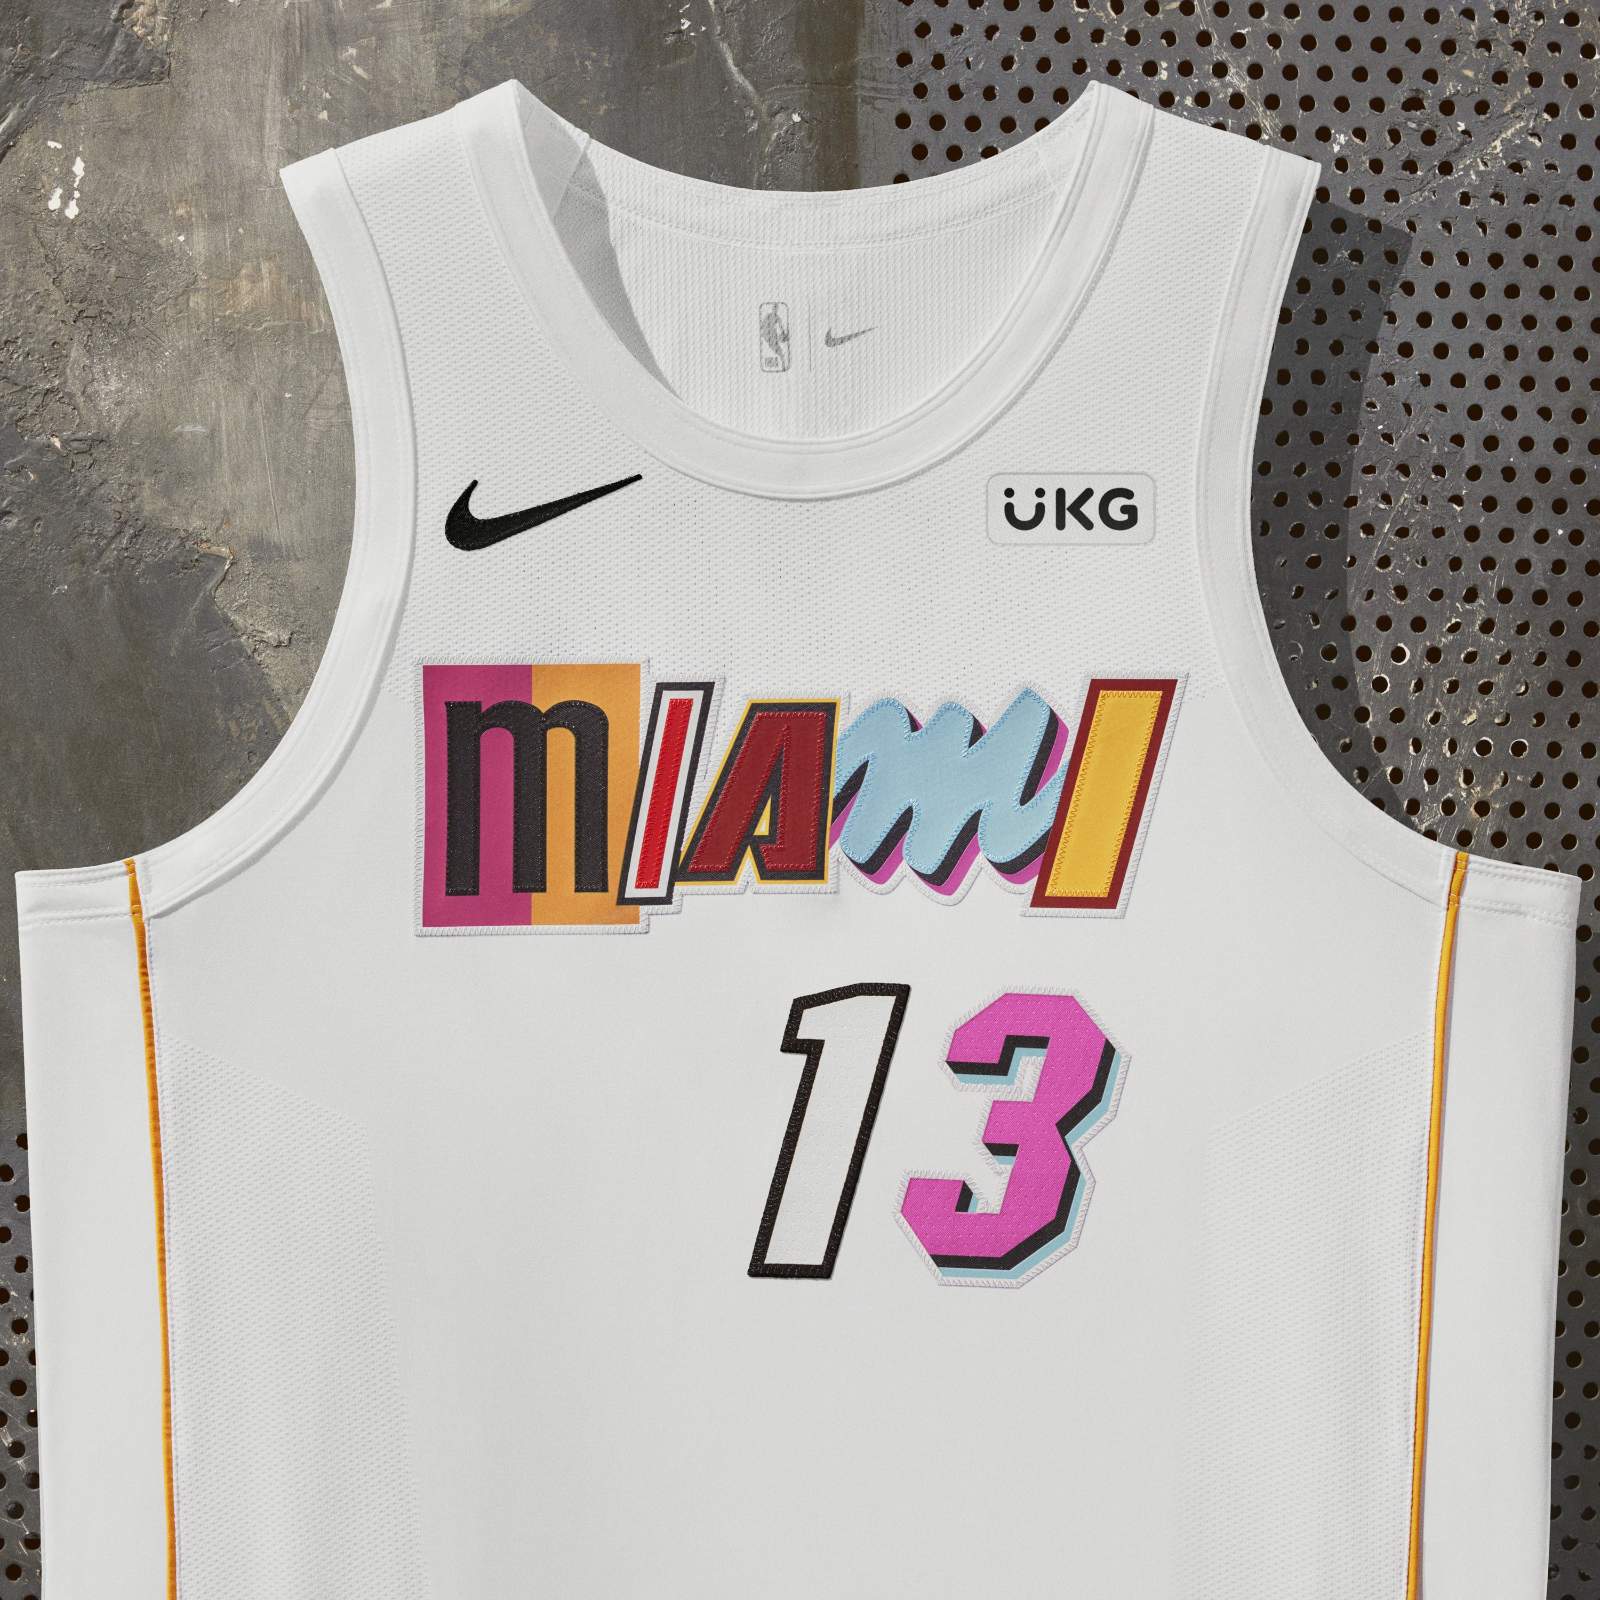 𝙃𝙀𝘼𝙏 𝙉𝘼𝙏𝙄𝙊𝙉 on X: The Heat will debut their new Miami Mashup  jerseys + court starting Nov. 4 Full jersey schedule.   / X